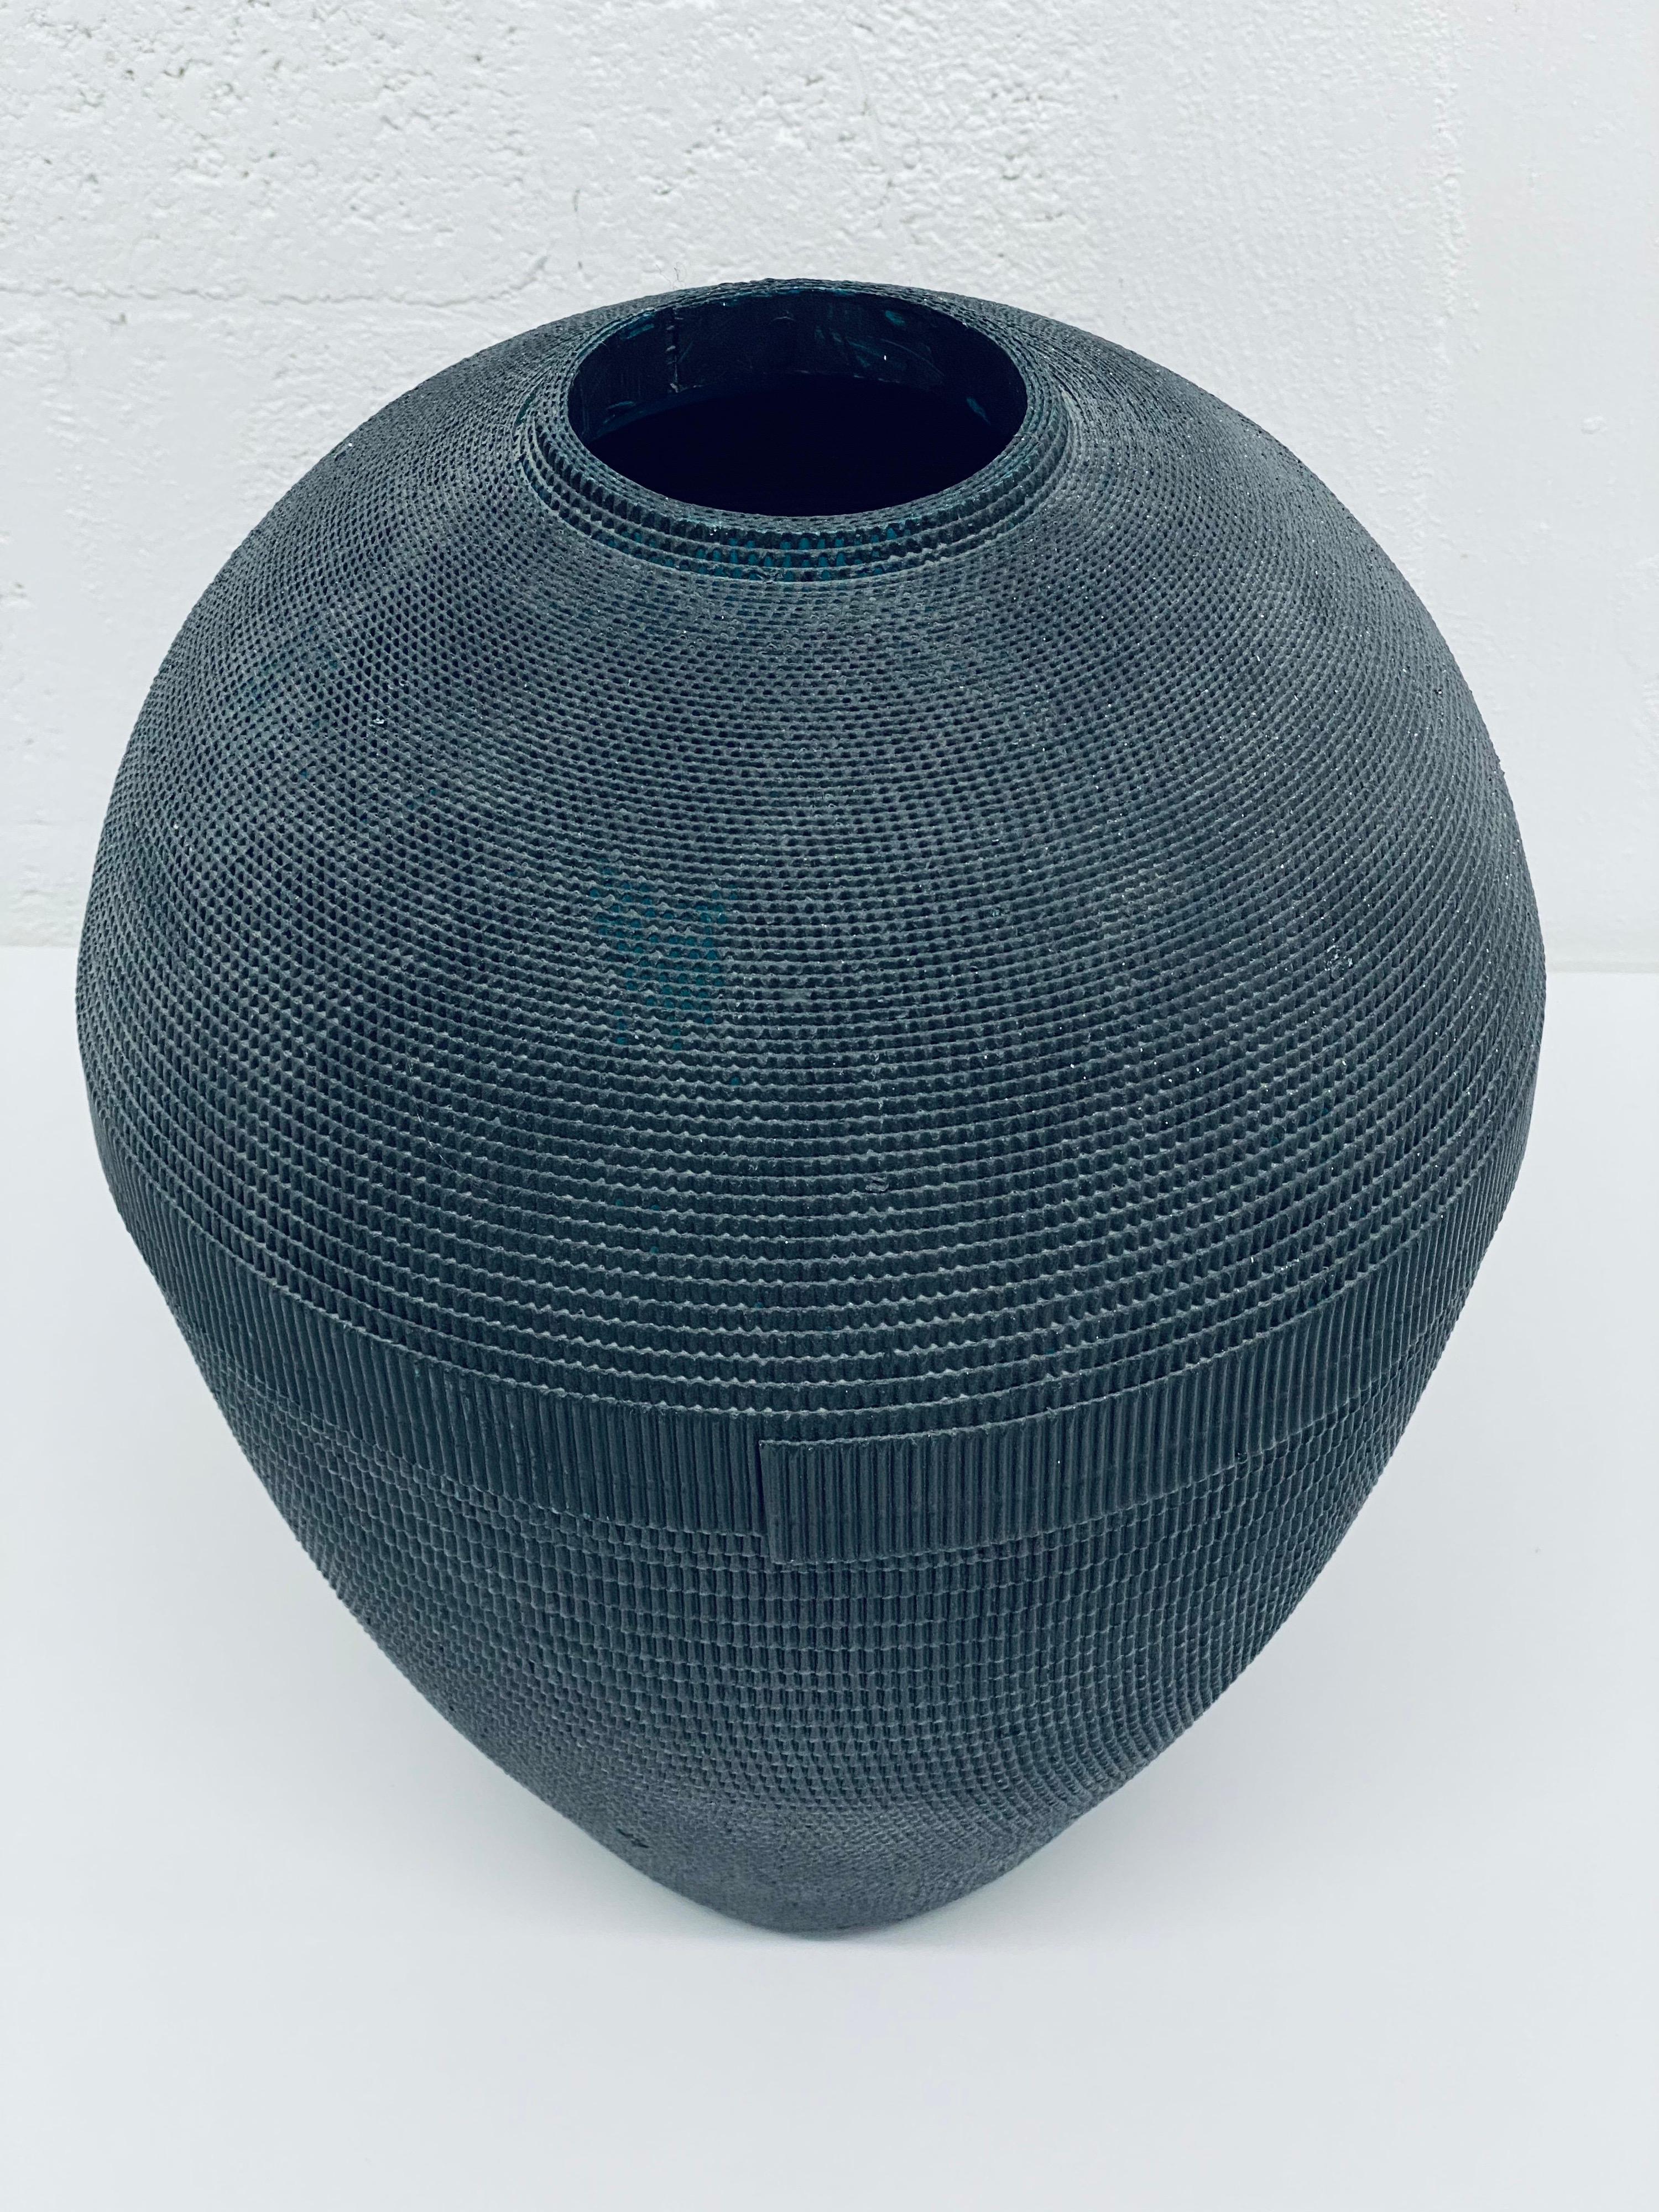 Late 20th Century Postmodern Black Corrugated Cardboard Vase by Flute, Chicago For Sale